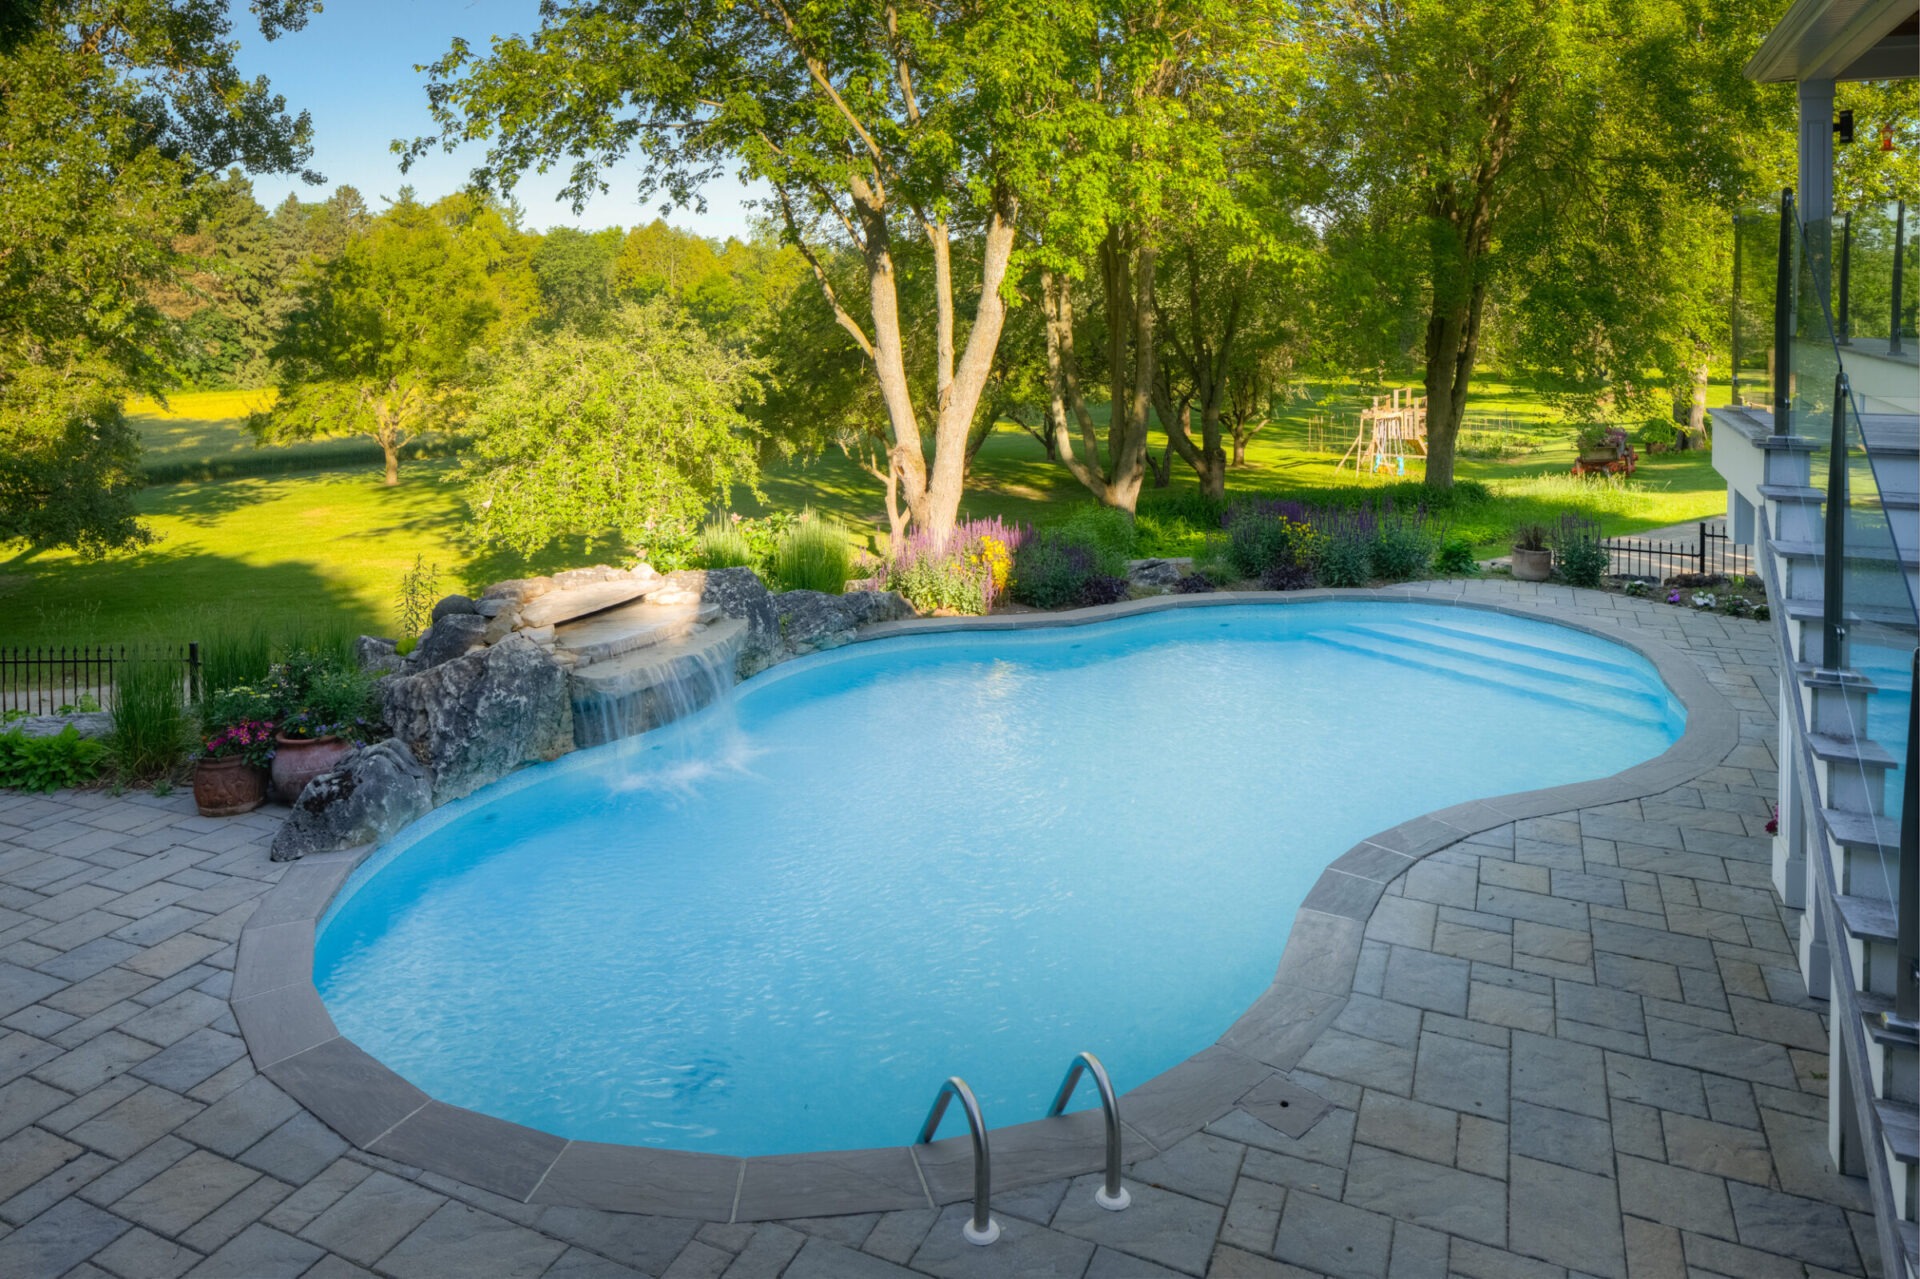 An outdoor swimming pool with a waterfall feature, surrounded by a paver patio, lush greenery, and trees under a bright, sunny sky.